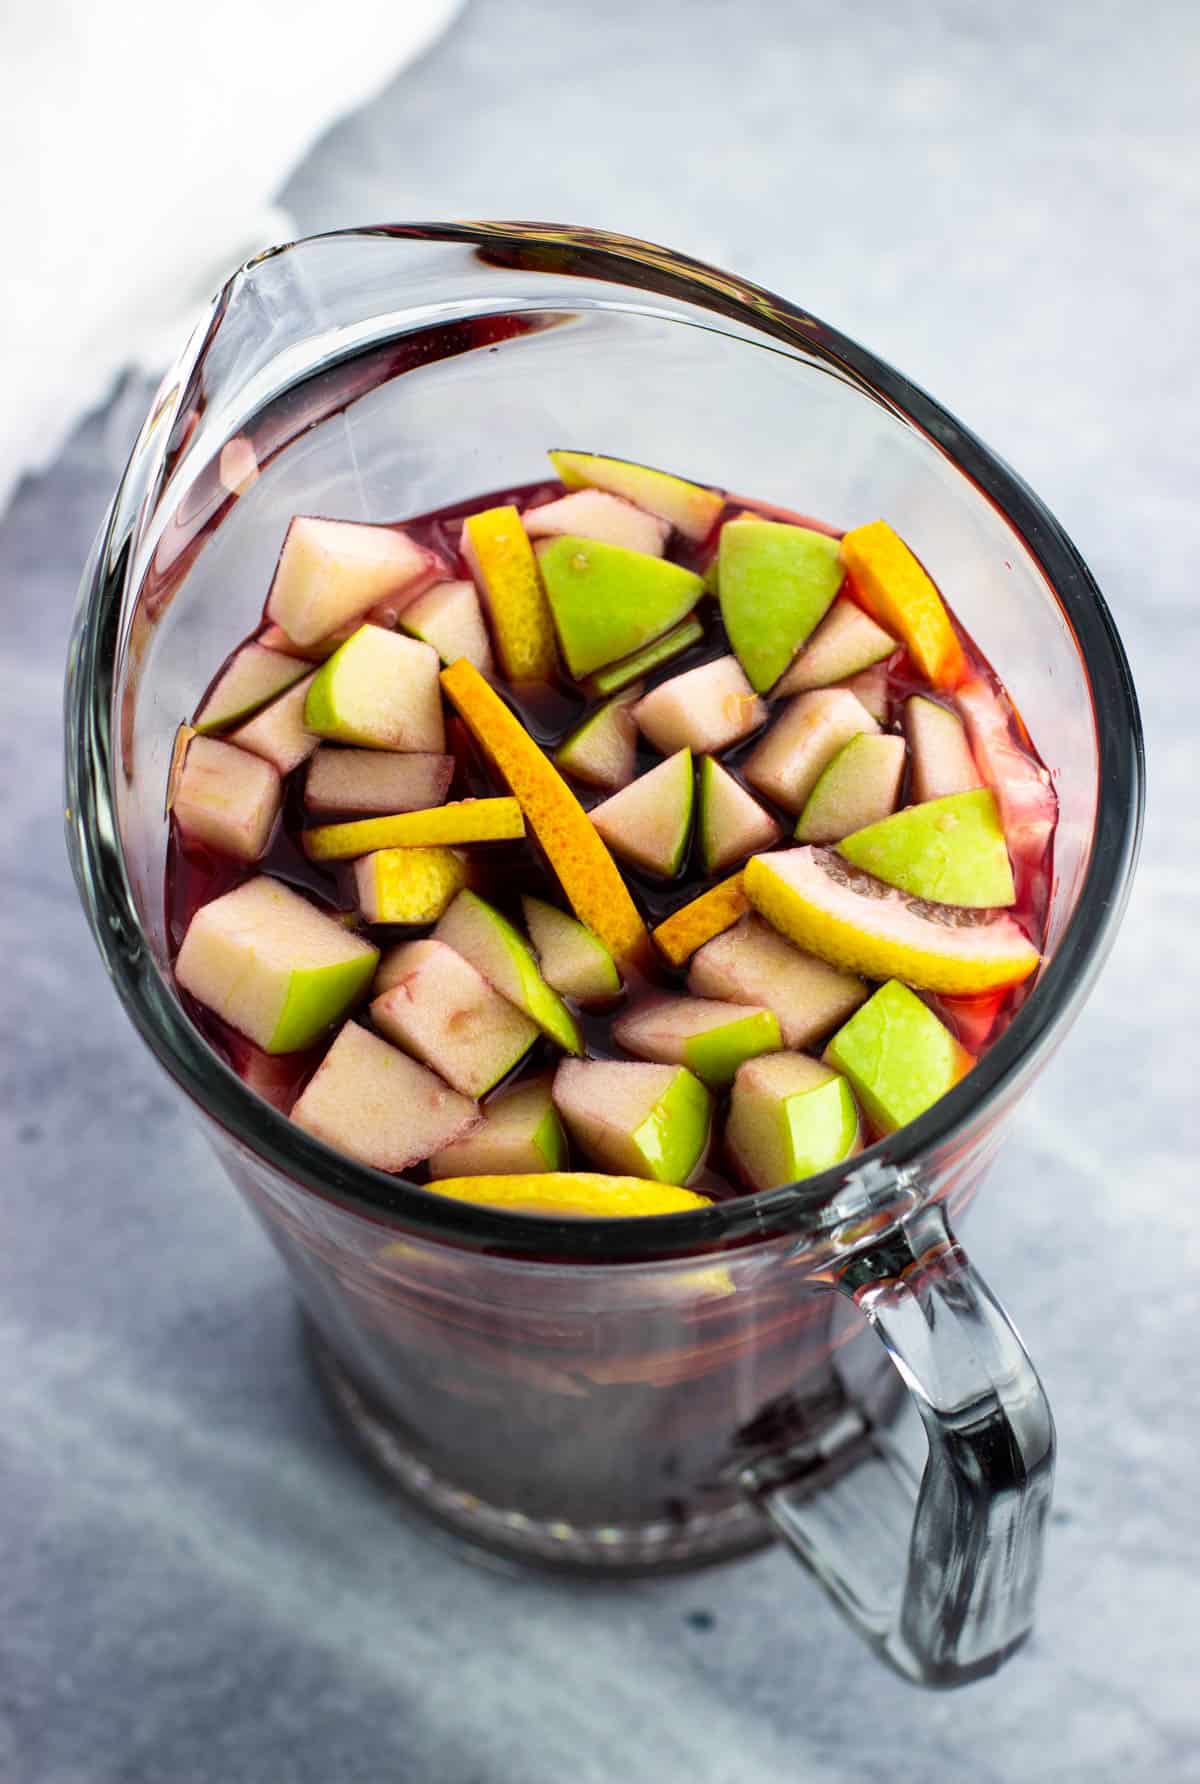 All but the carbonated ingredients added to the pitcher with fruit and cinnamon sticks.